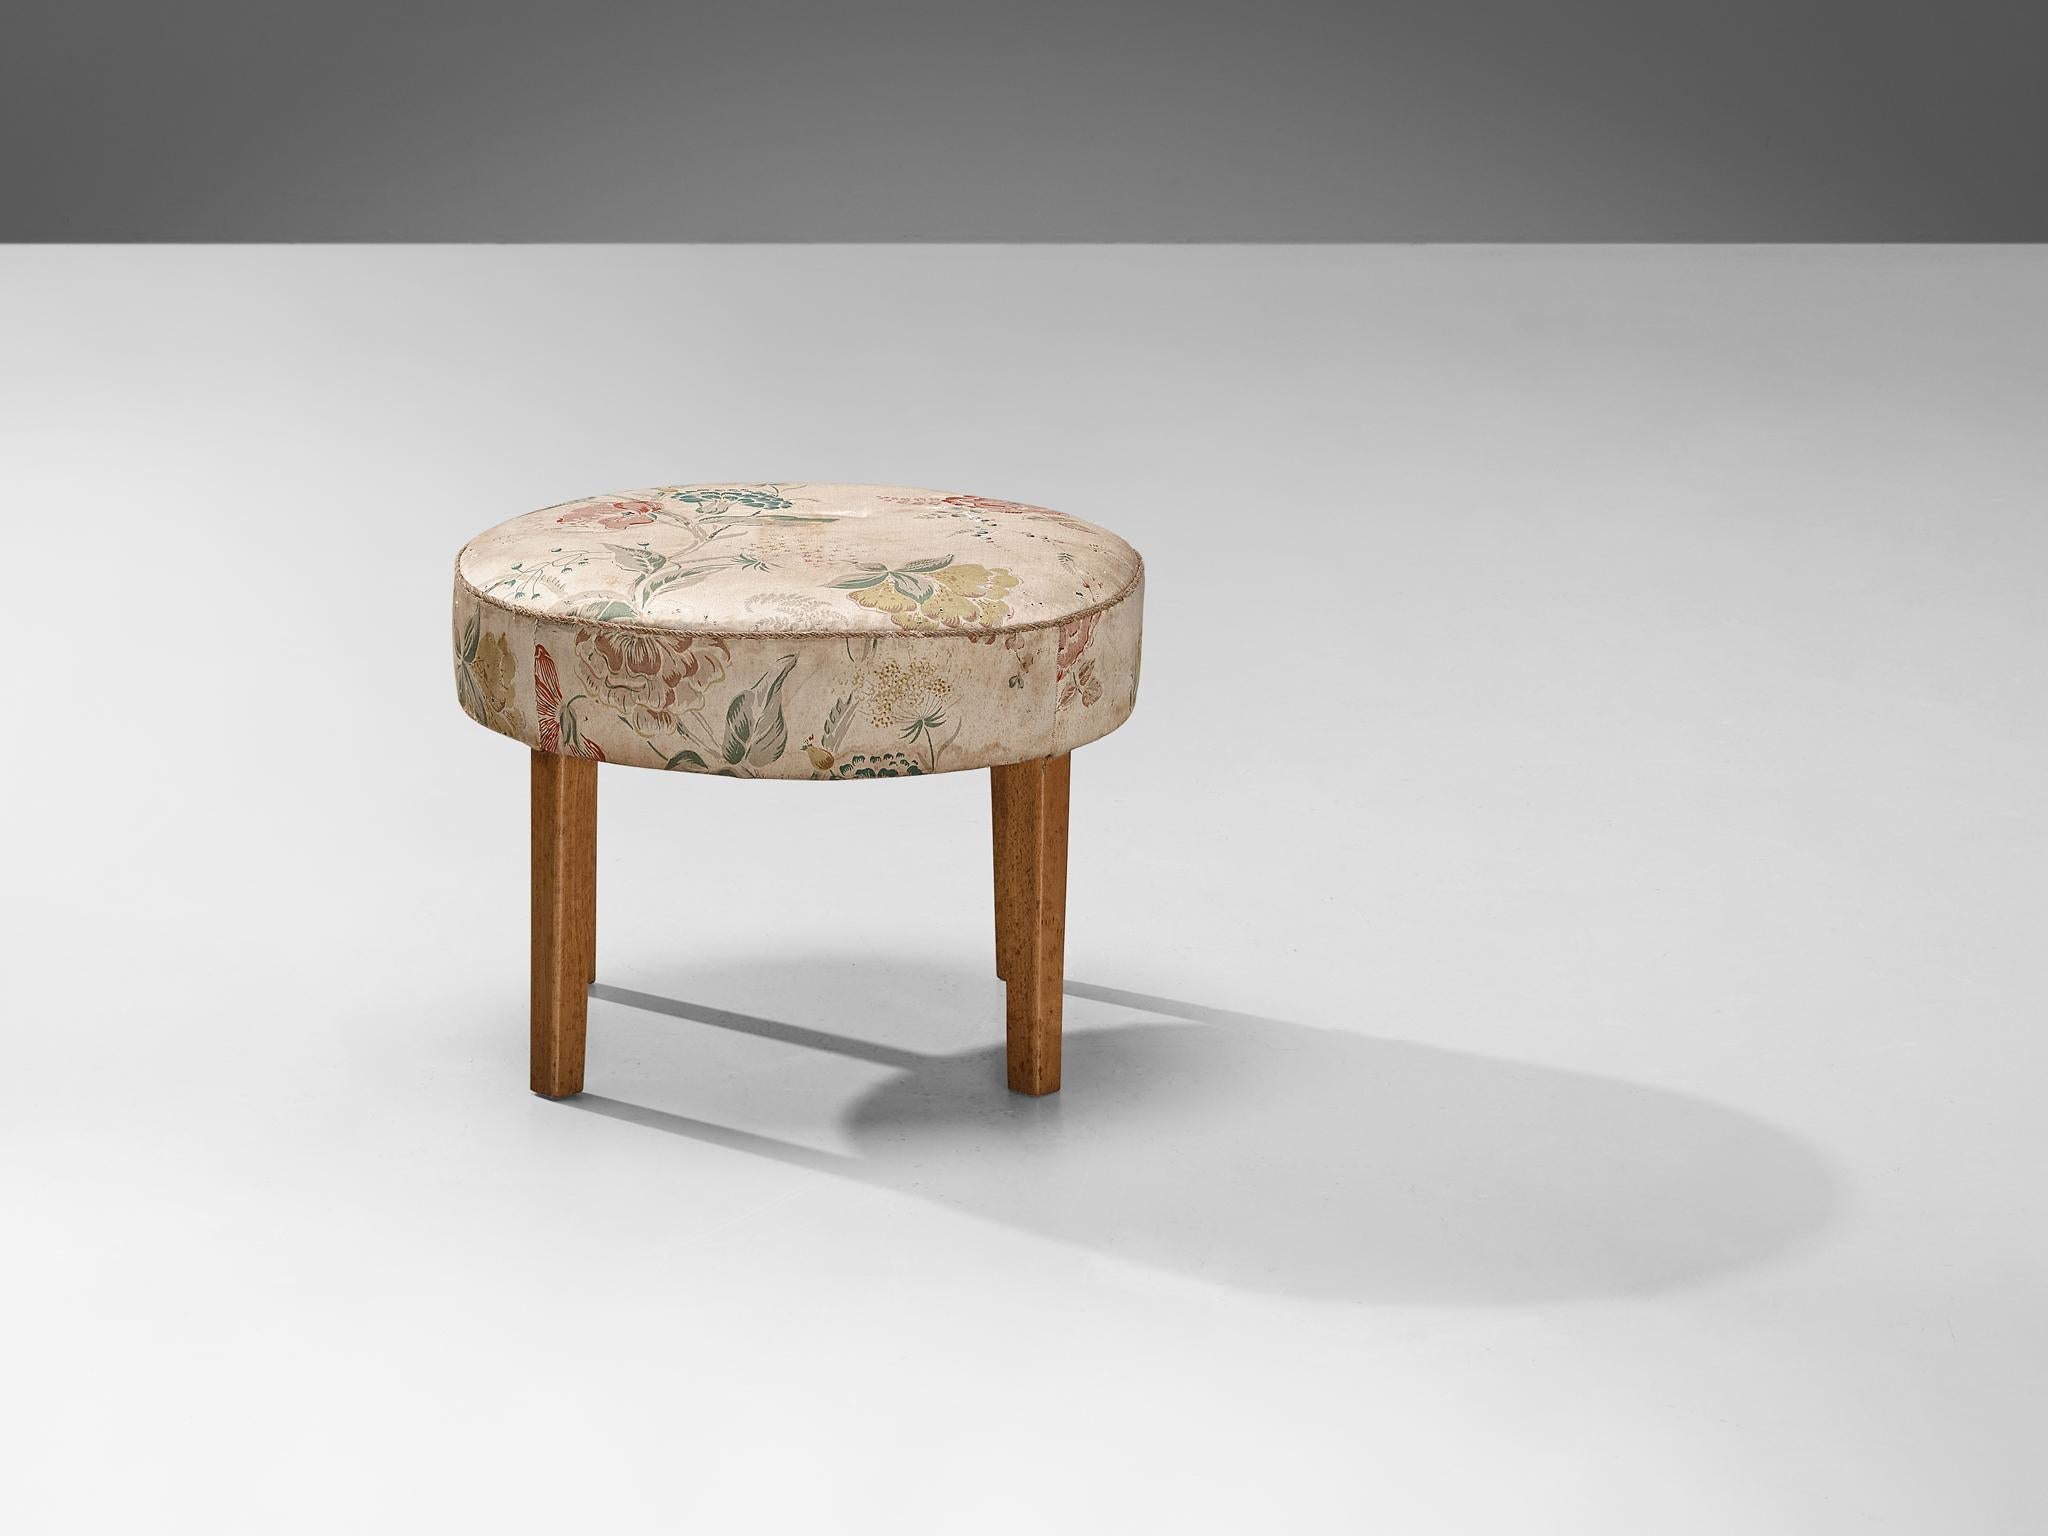 Scandinavian Stool in Floral Upholstery